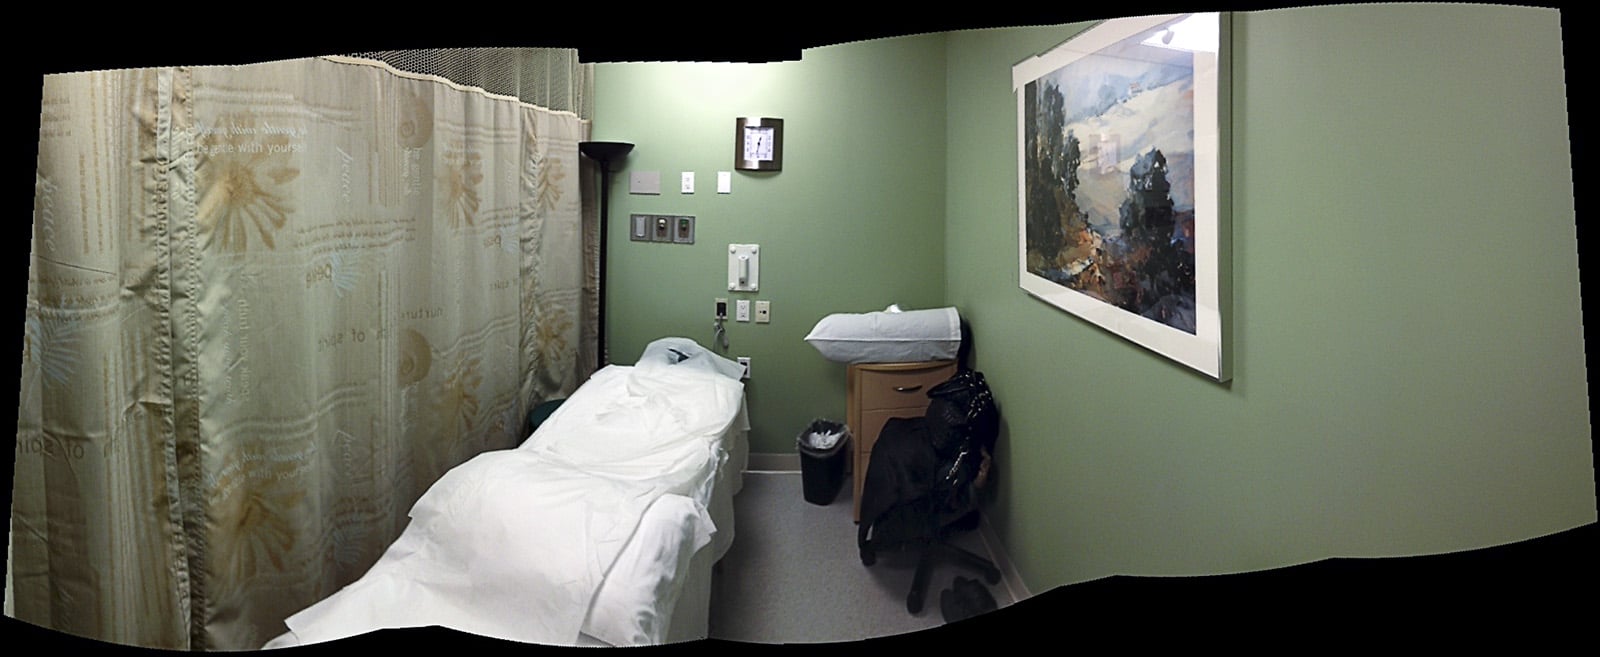   Acupuncture room where I received treatment to ease the side effects of other treatments.  